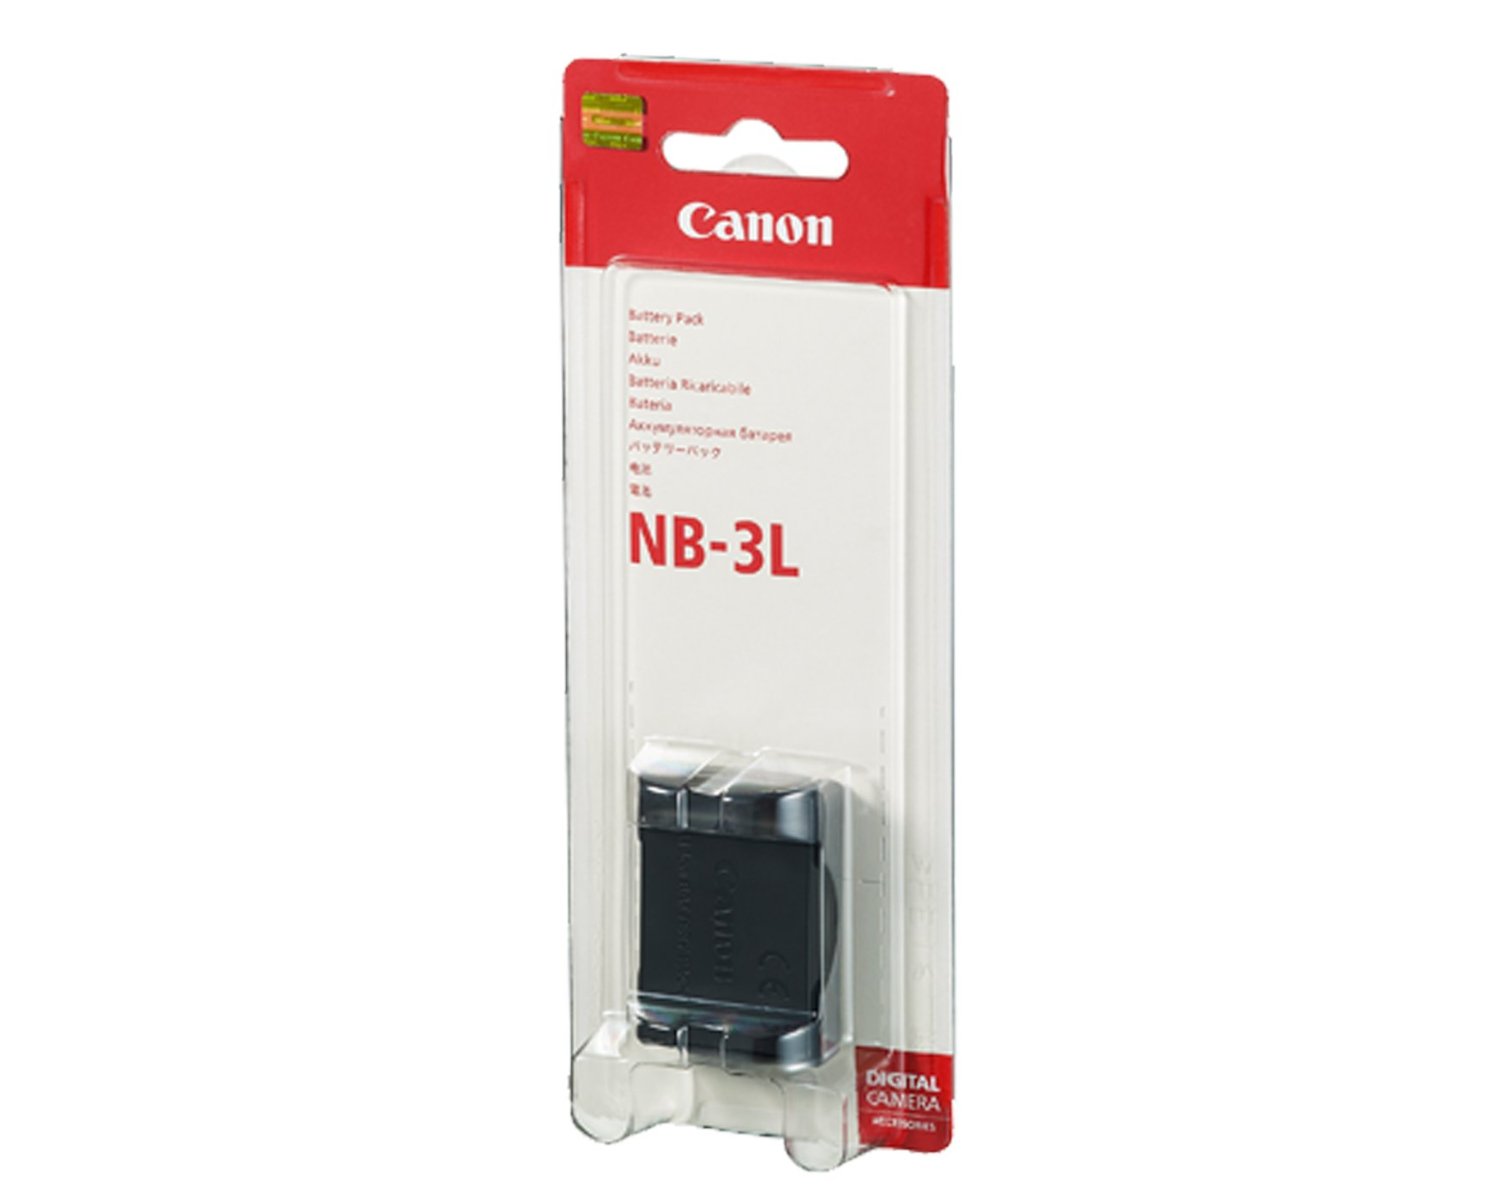 Canon Battery Pack NB - 3L